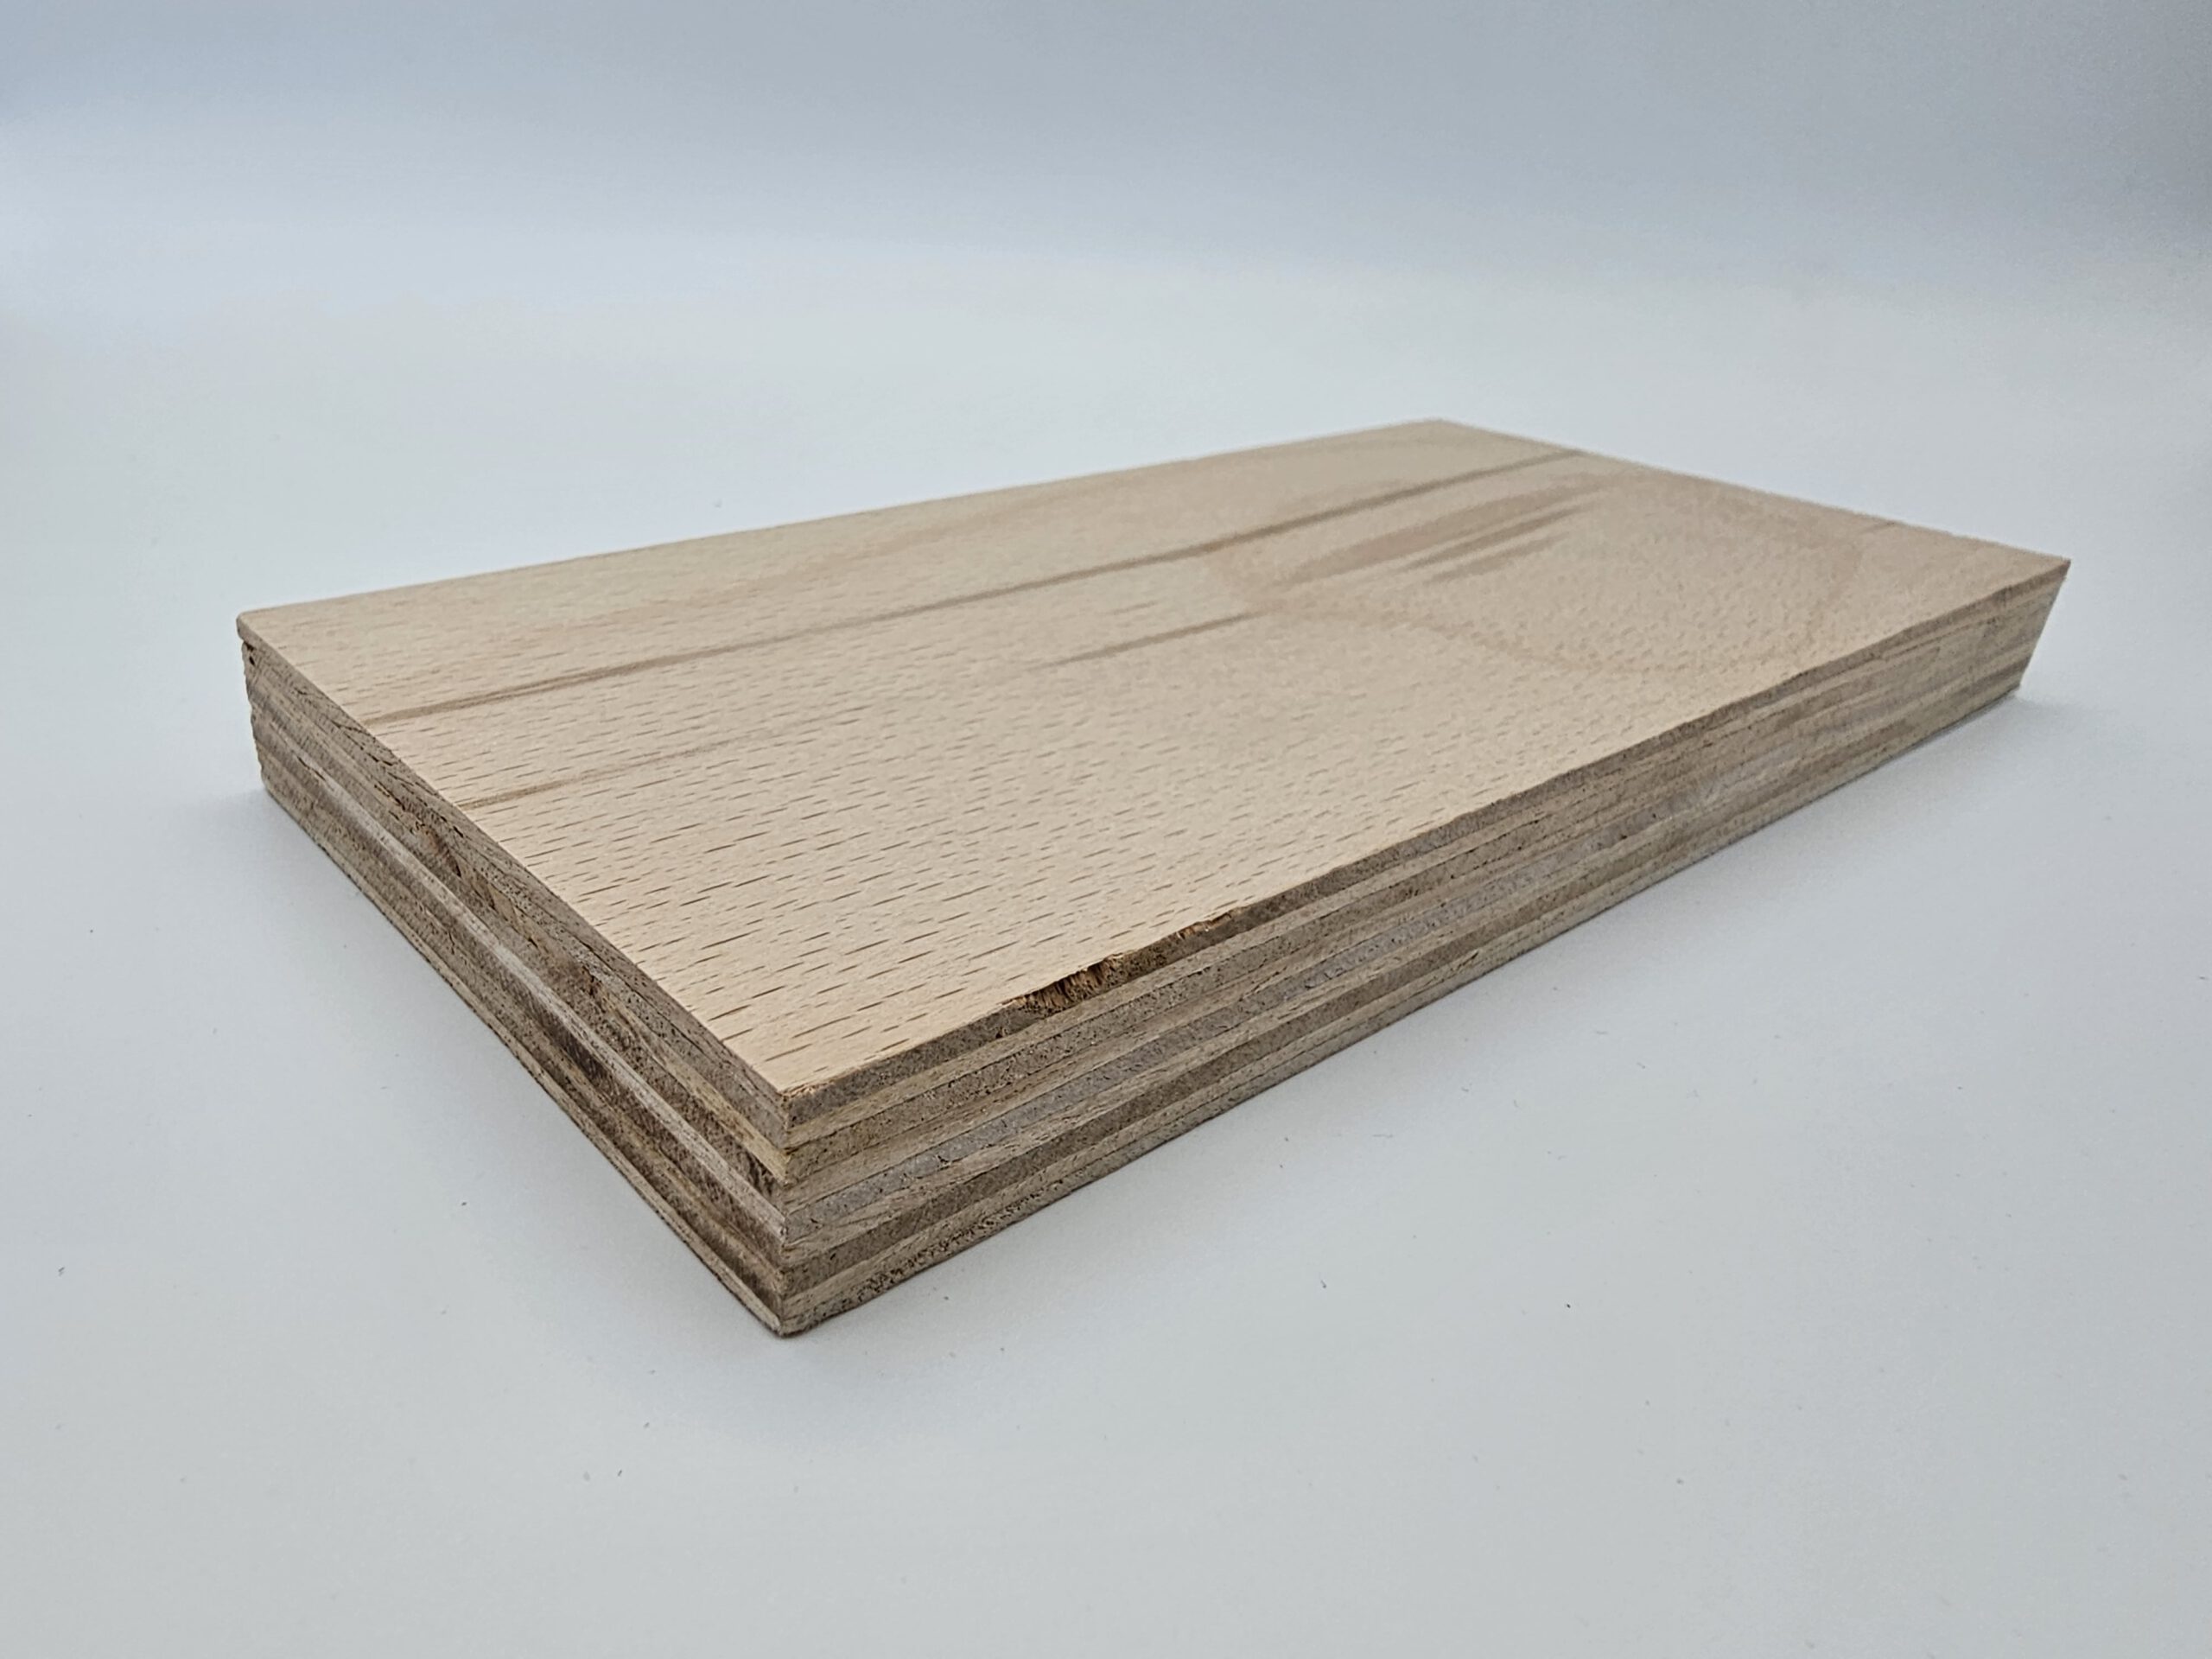 FaMPLY Beech Faced Plywood